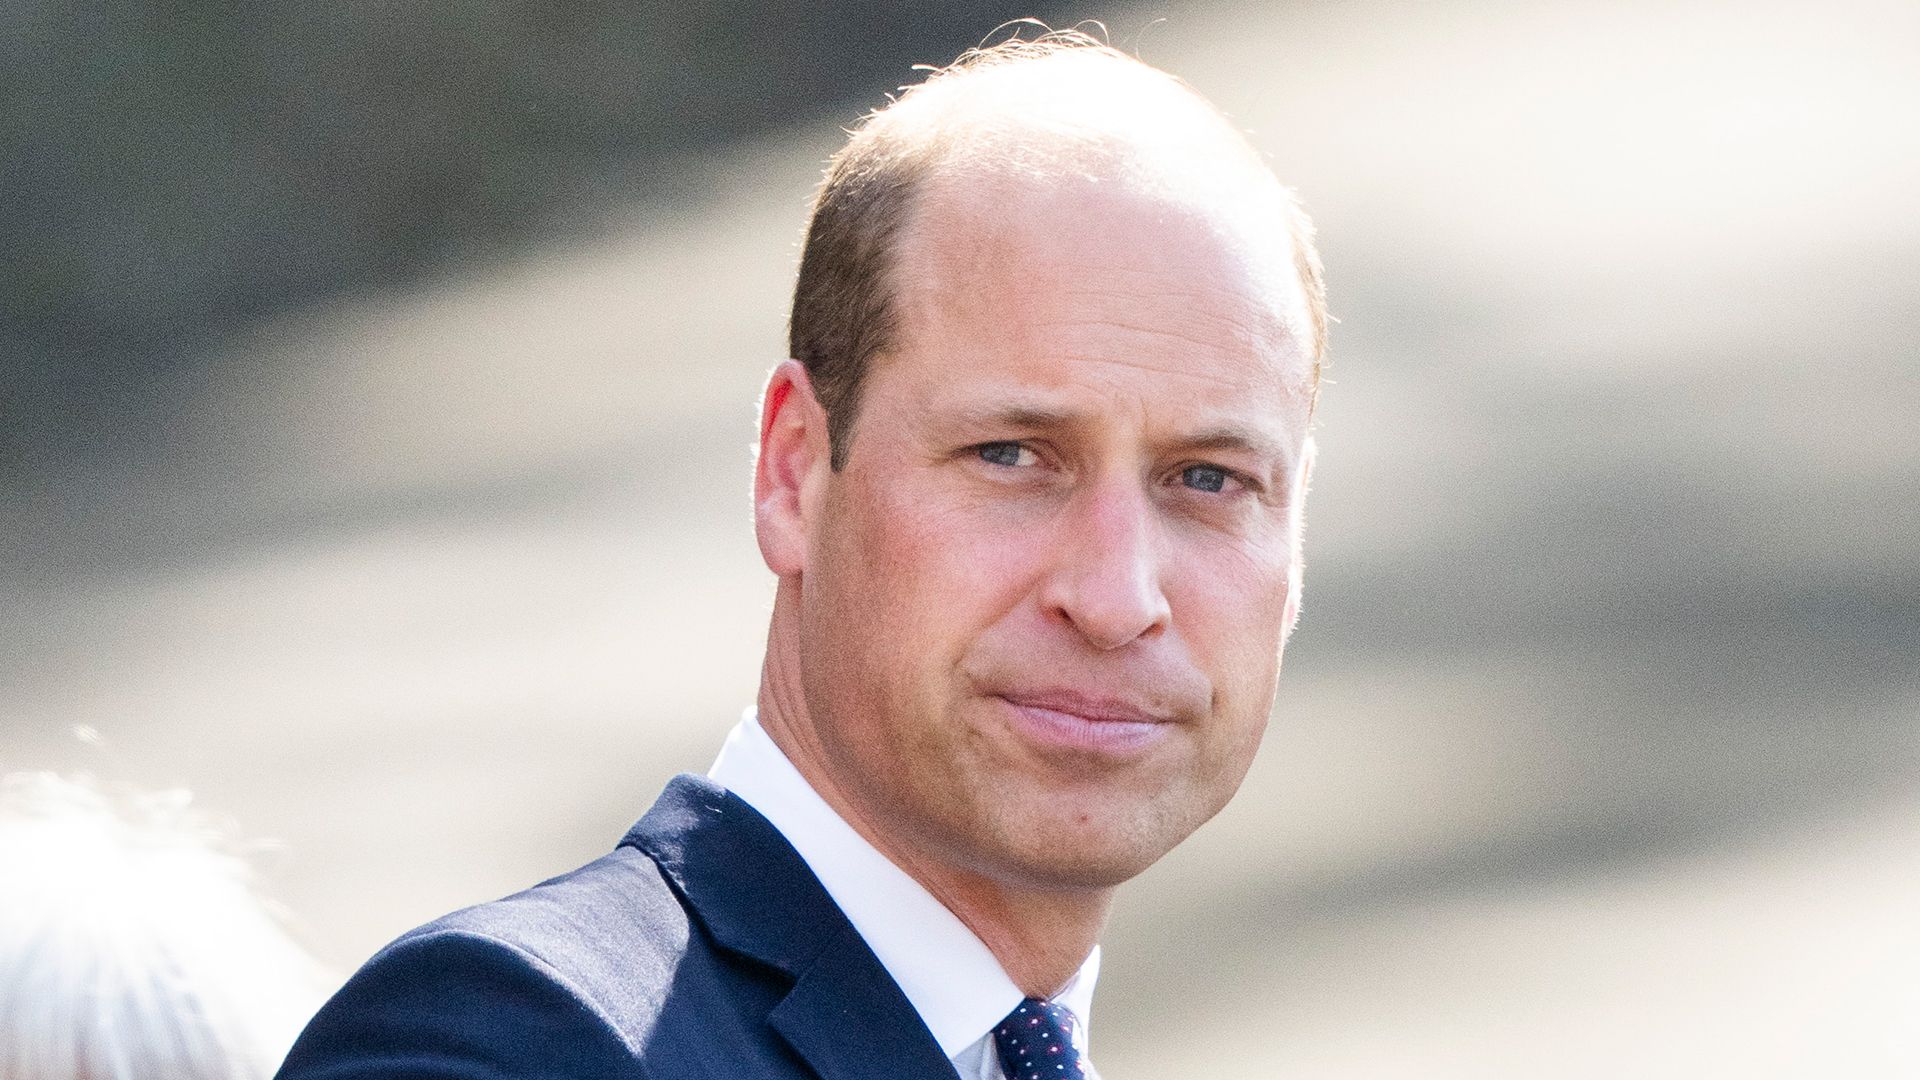 Prince William wearing a navy suit and white shirt 